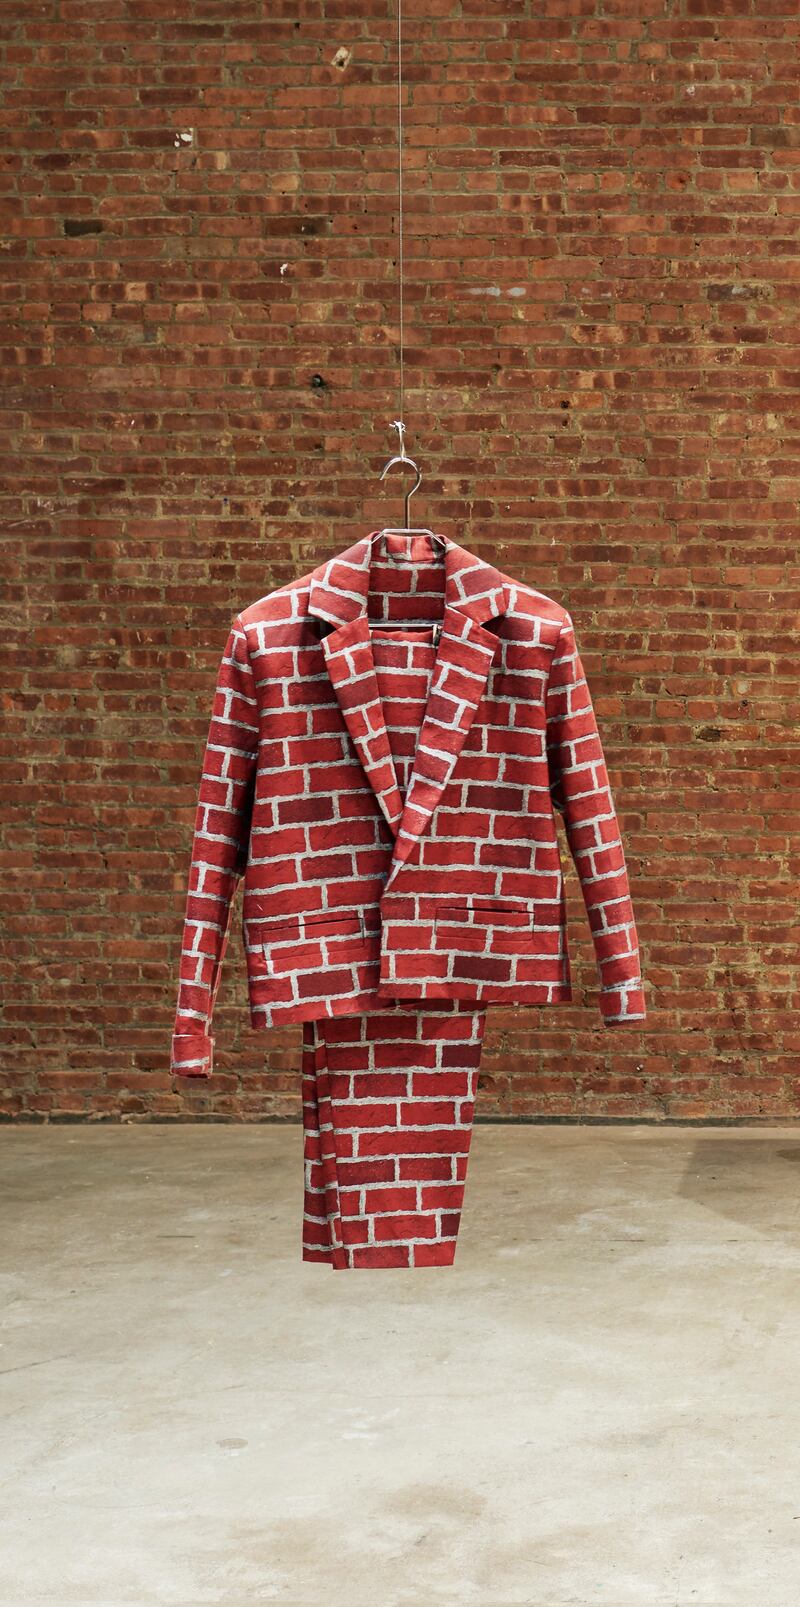 Brick Suit by Anthea Hamilton (photo by Kyle Knodell)